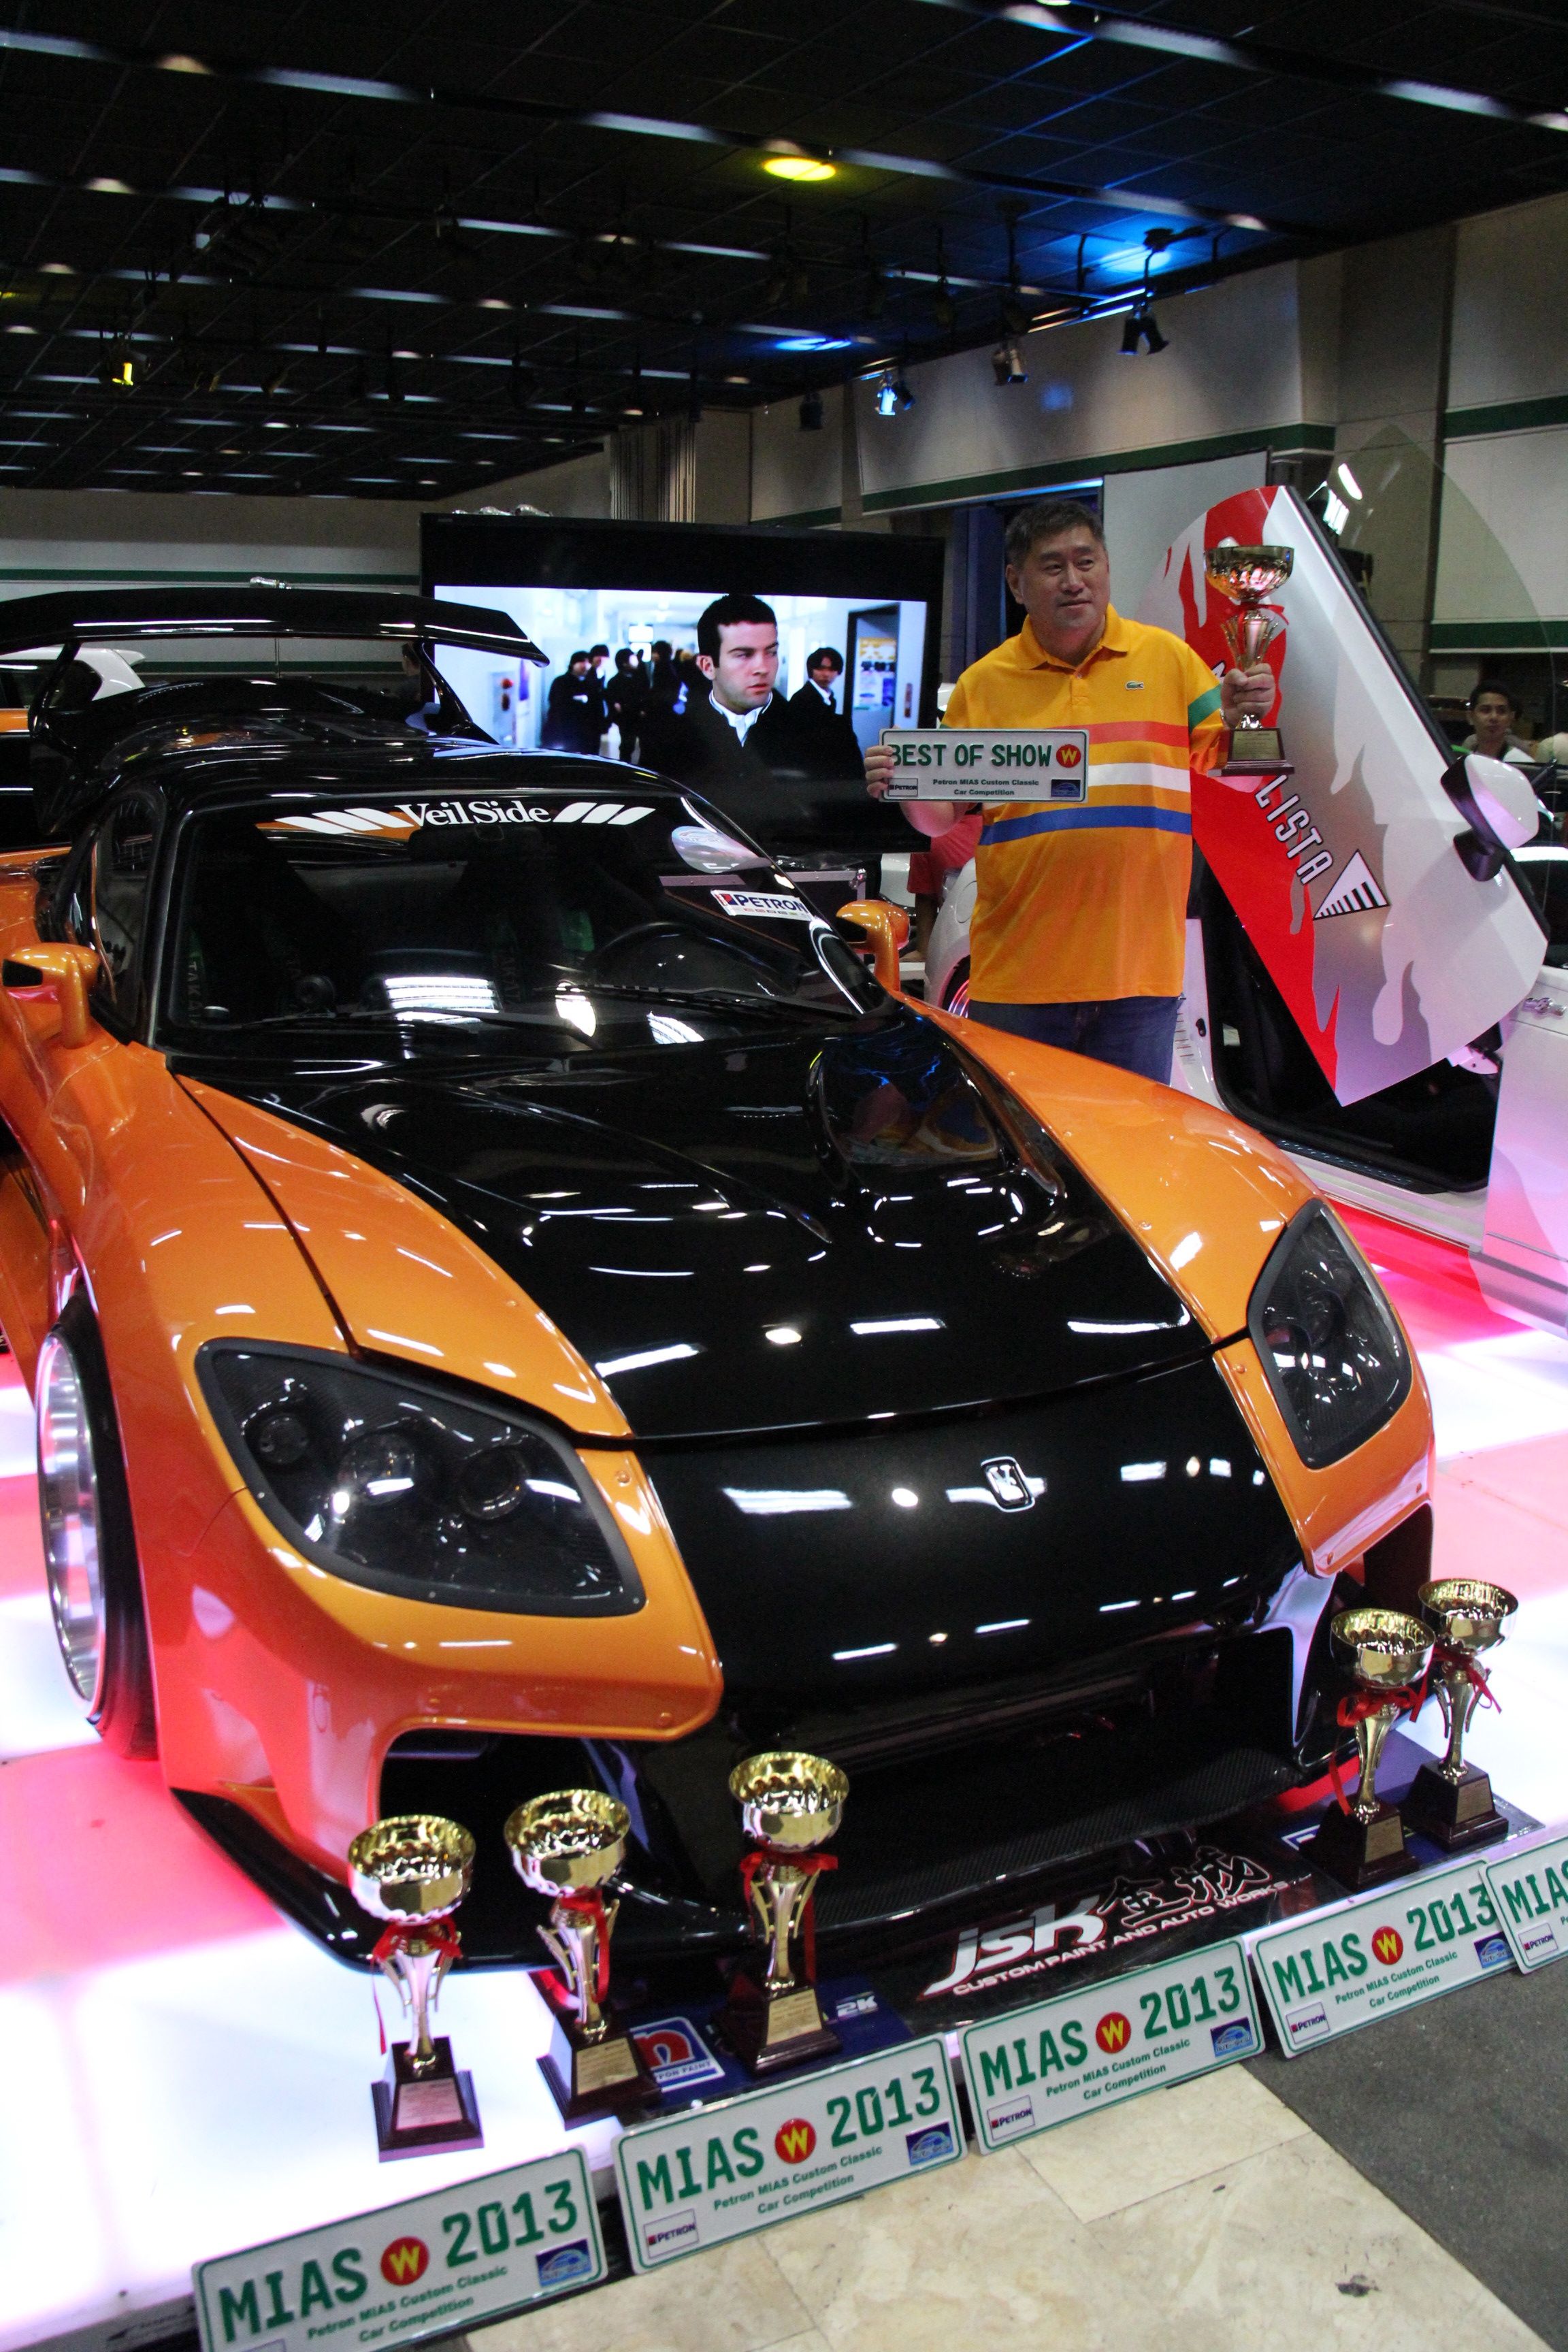 Johnson Tan of JSK and his Best of Show RX7